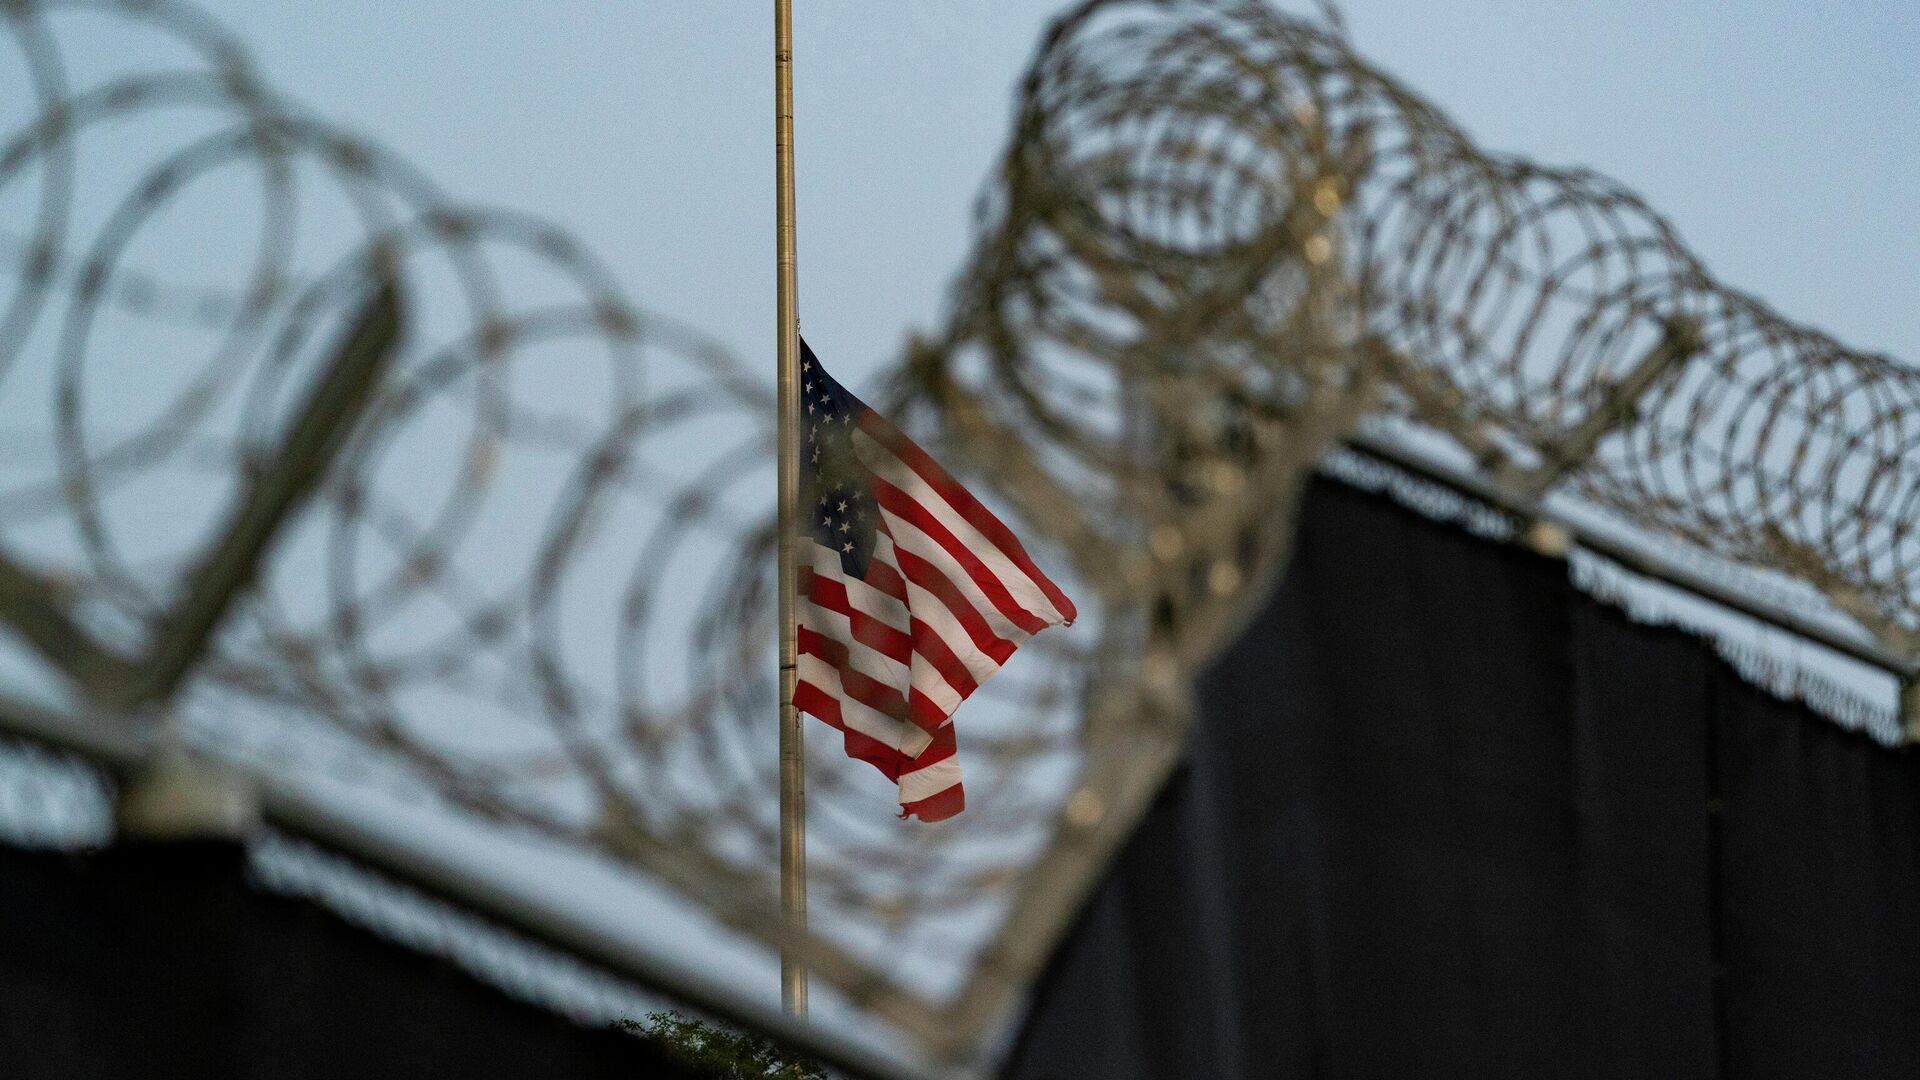 In this Aug. 29, 2021, file photo reviewed by U.S. military officials, a flag flies at half-staff in honor of the U.S. service members and other victims killed in the terrorist attack in Kabul, Afghanistan, as seen from Camp Justice in Guantanamo Bay Naval Base, Cuba. - Sputnik International, 1920, 06.01.2022